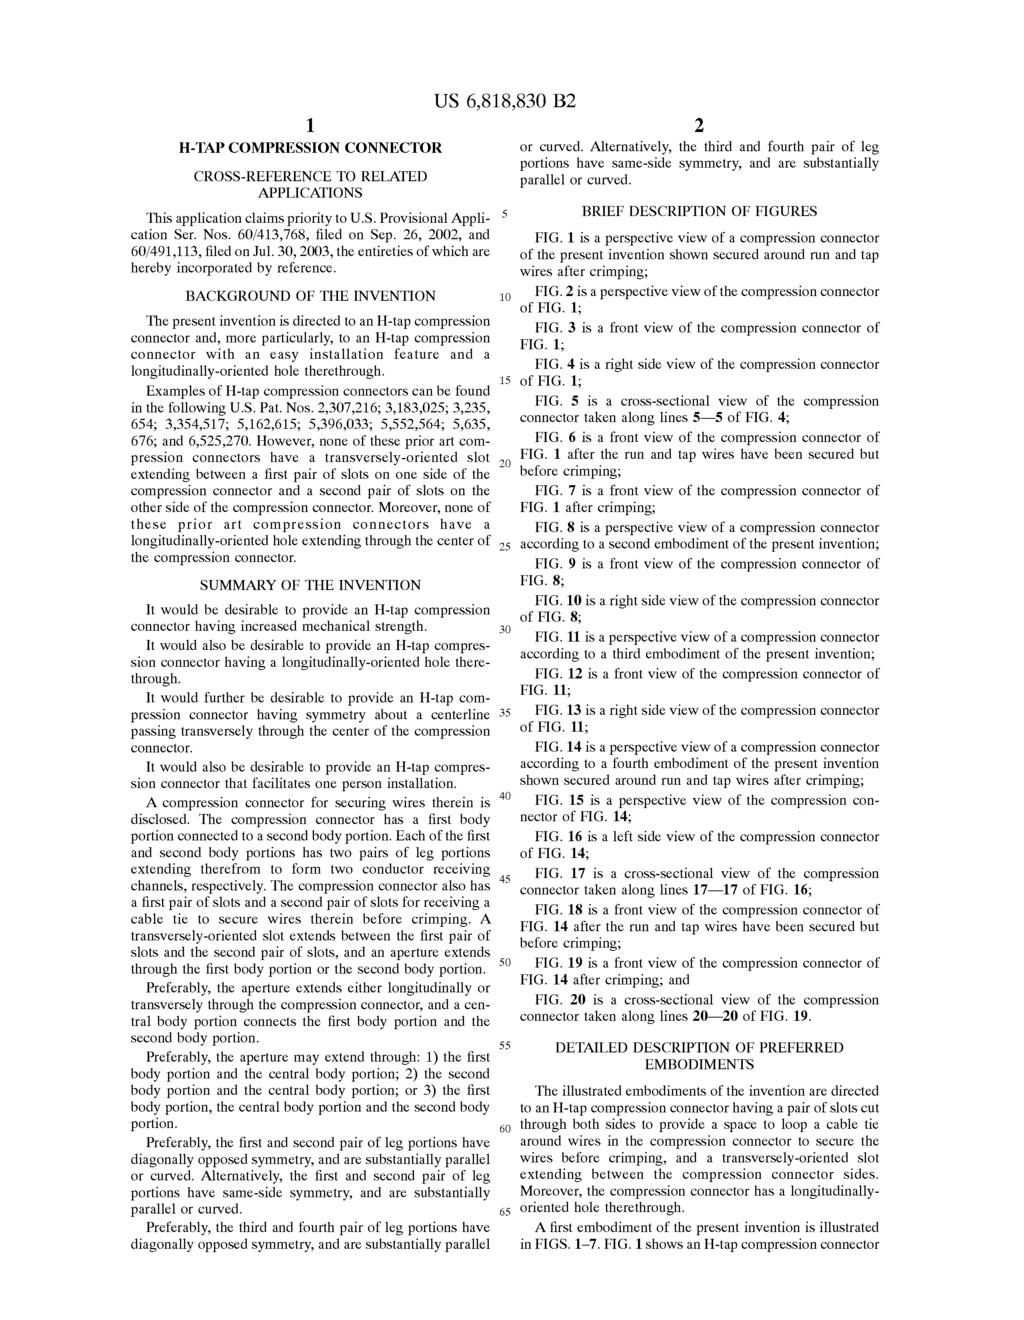 1 H-TAP COMPRESSION CONNECTOR CROSS-REFERENCE TO RELATED APPLICATIONS This application claims priority to U.S. Provisional Appli cation Ser. Nos. 60/413,768, filed on Sep.